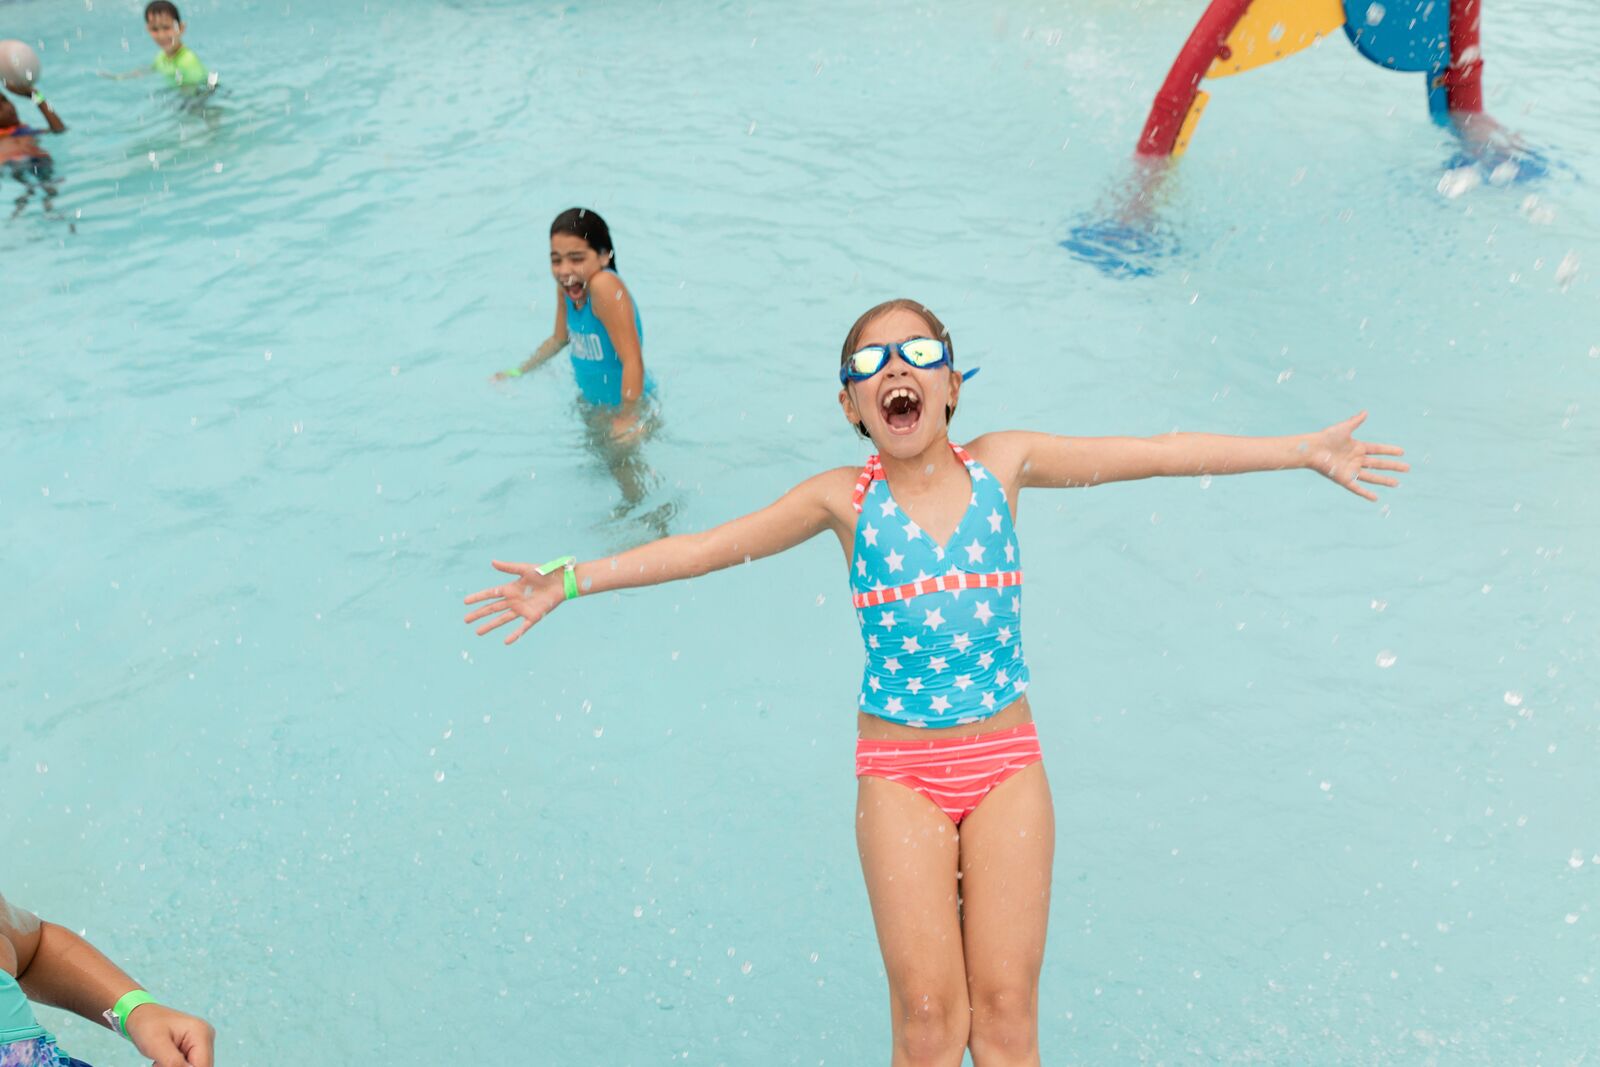 Girl falling backwards in pool with her arms wide open, smiling